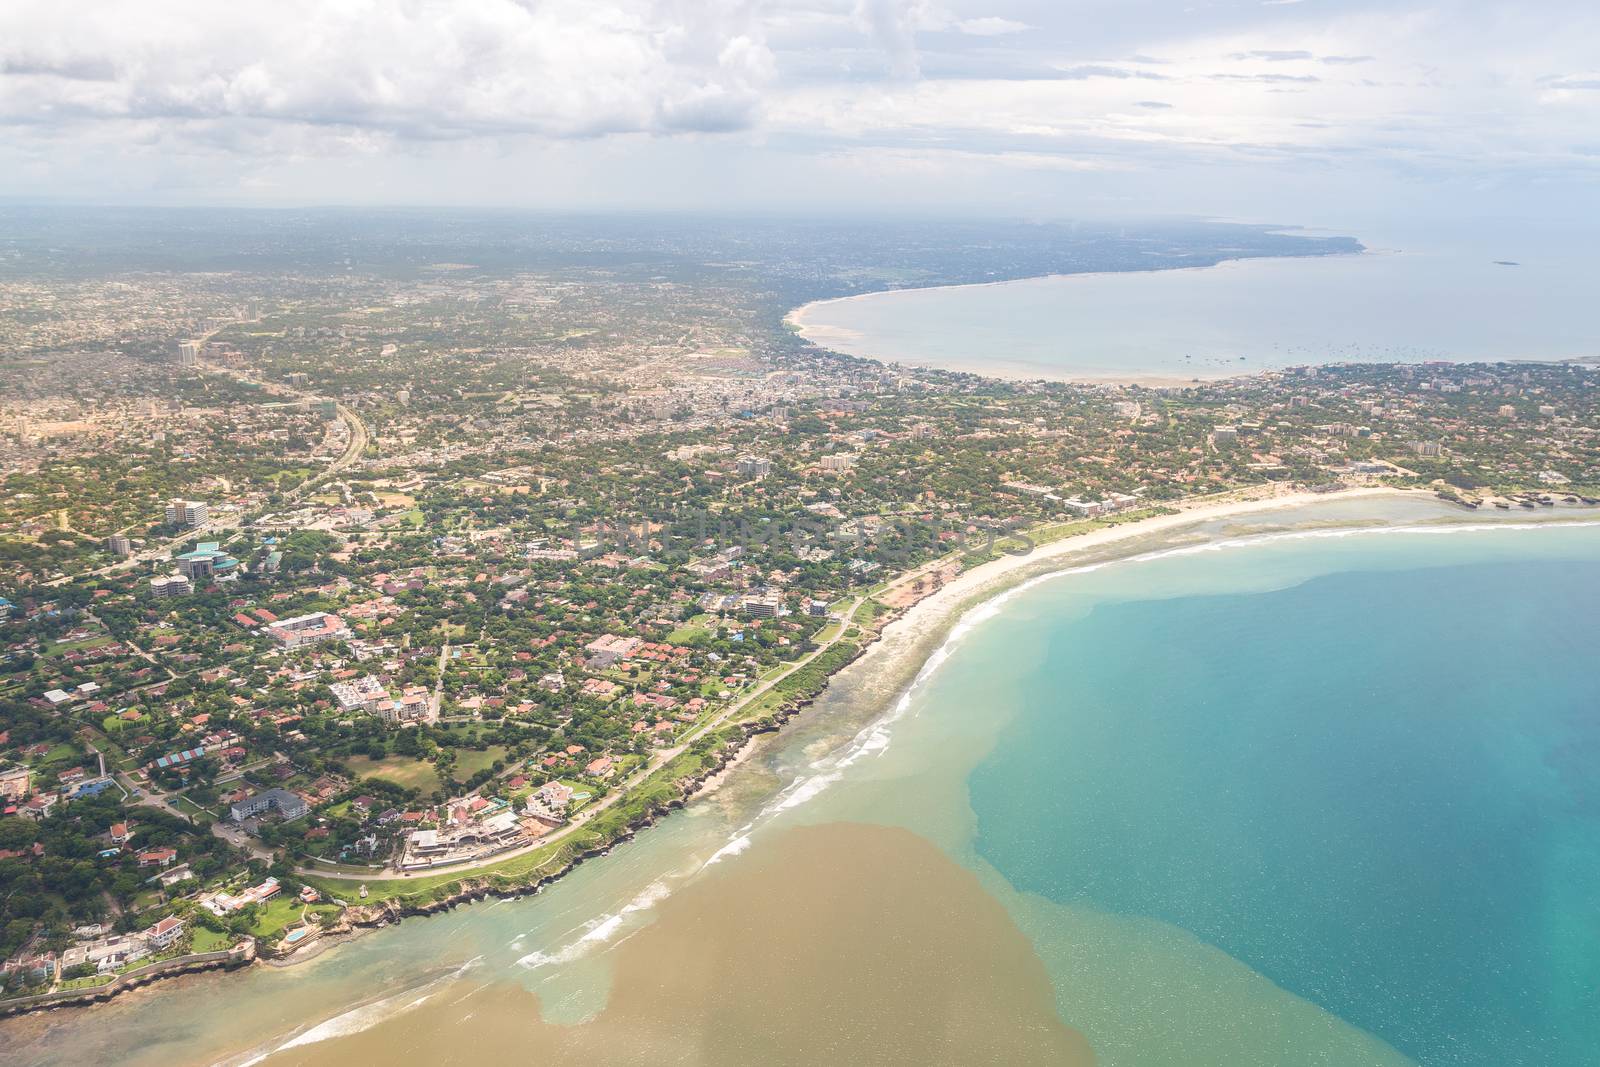 Aerial view of the city of Dar Es Salaam along the shores of the Indian Ocean showing the densely packed buildings